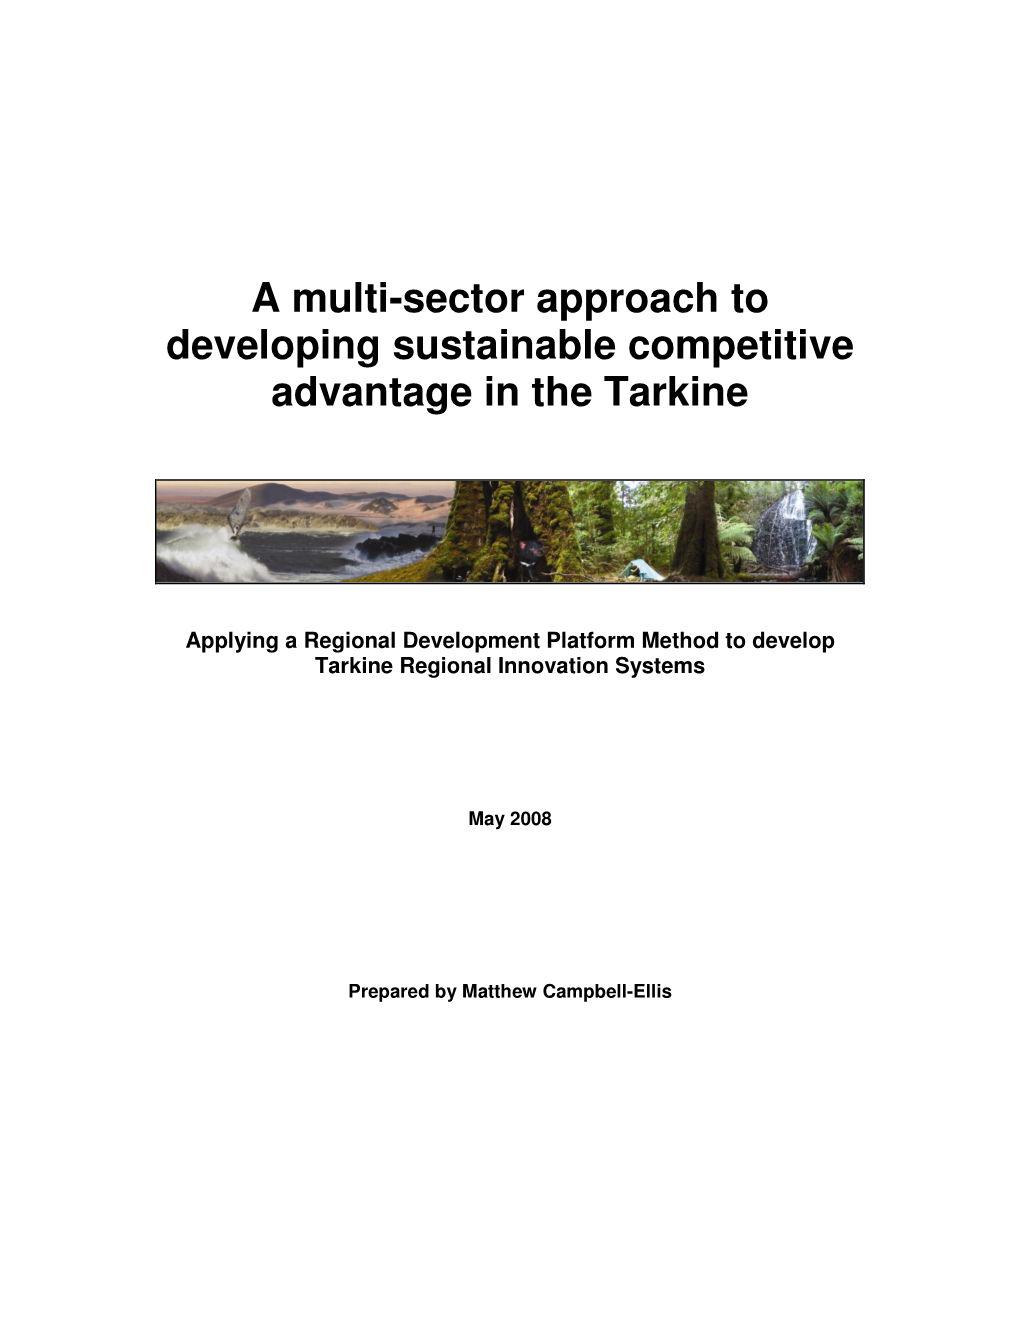 A Multi-Sector Approach to Developing Sustainable Competitive Advantage in the Tarkine